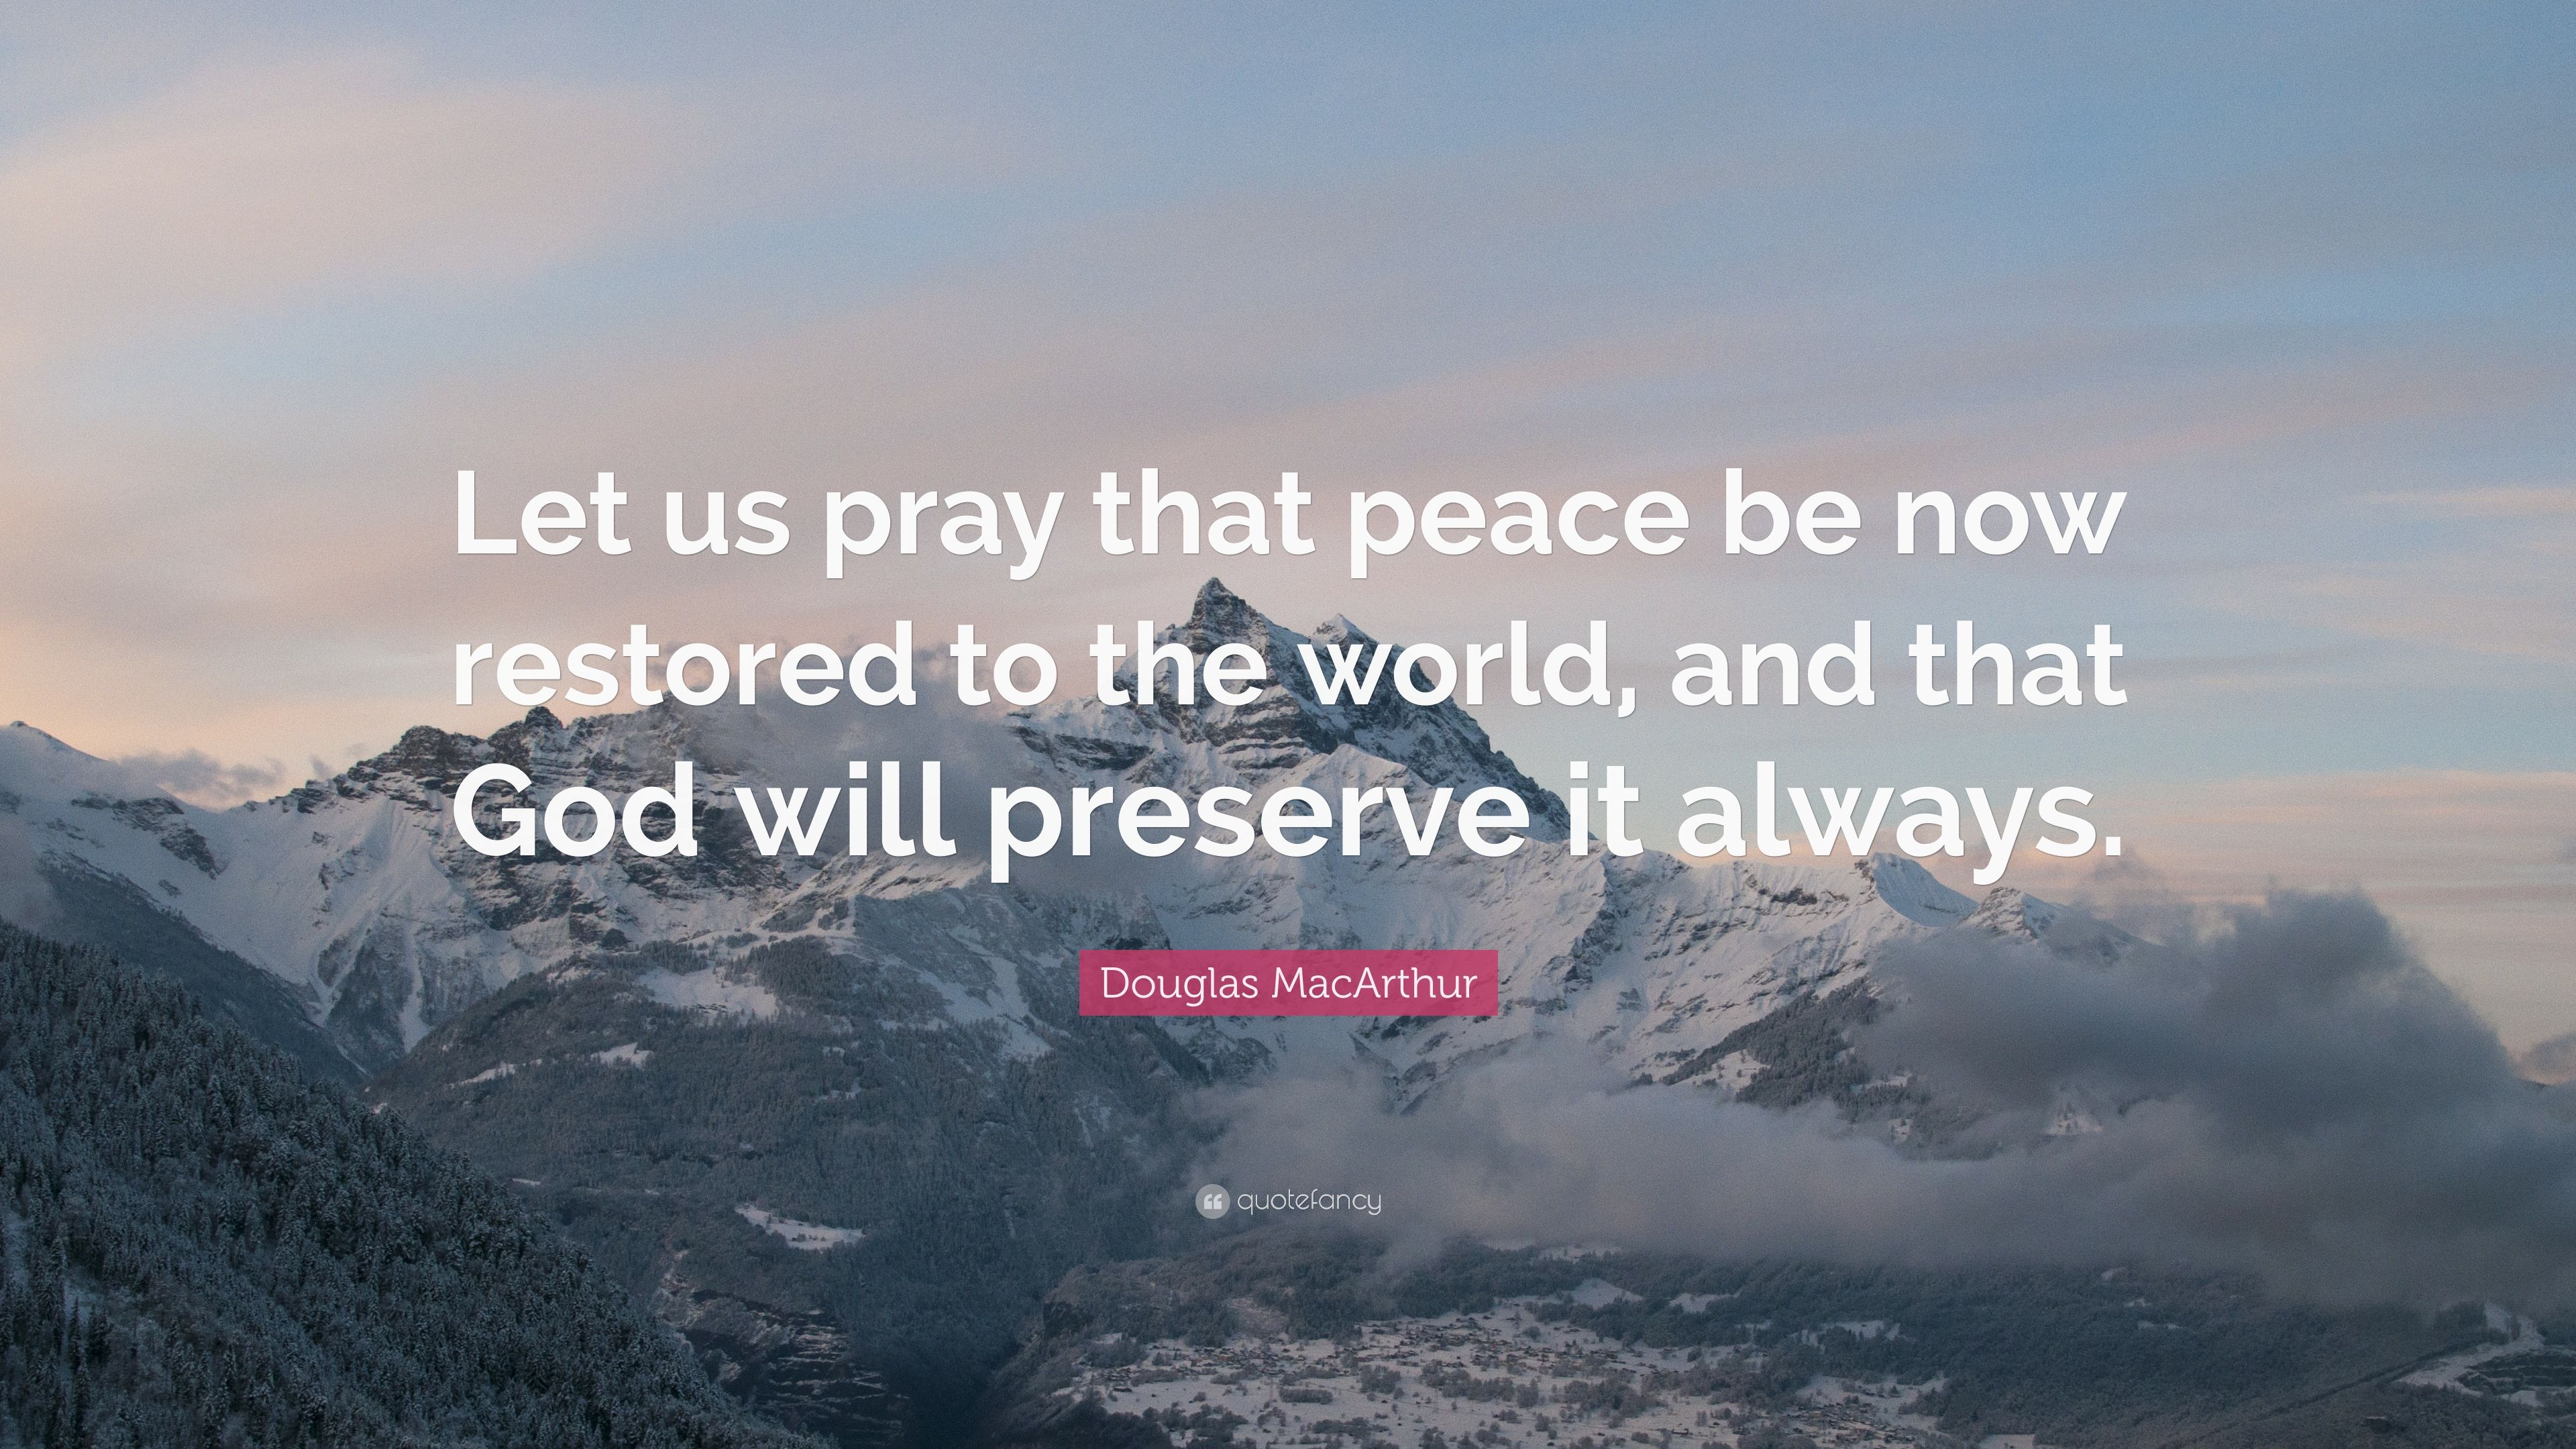 Douglas MacArthur Quote: “Let us pray that peace be now restored